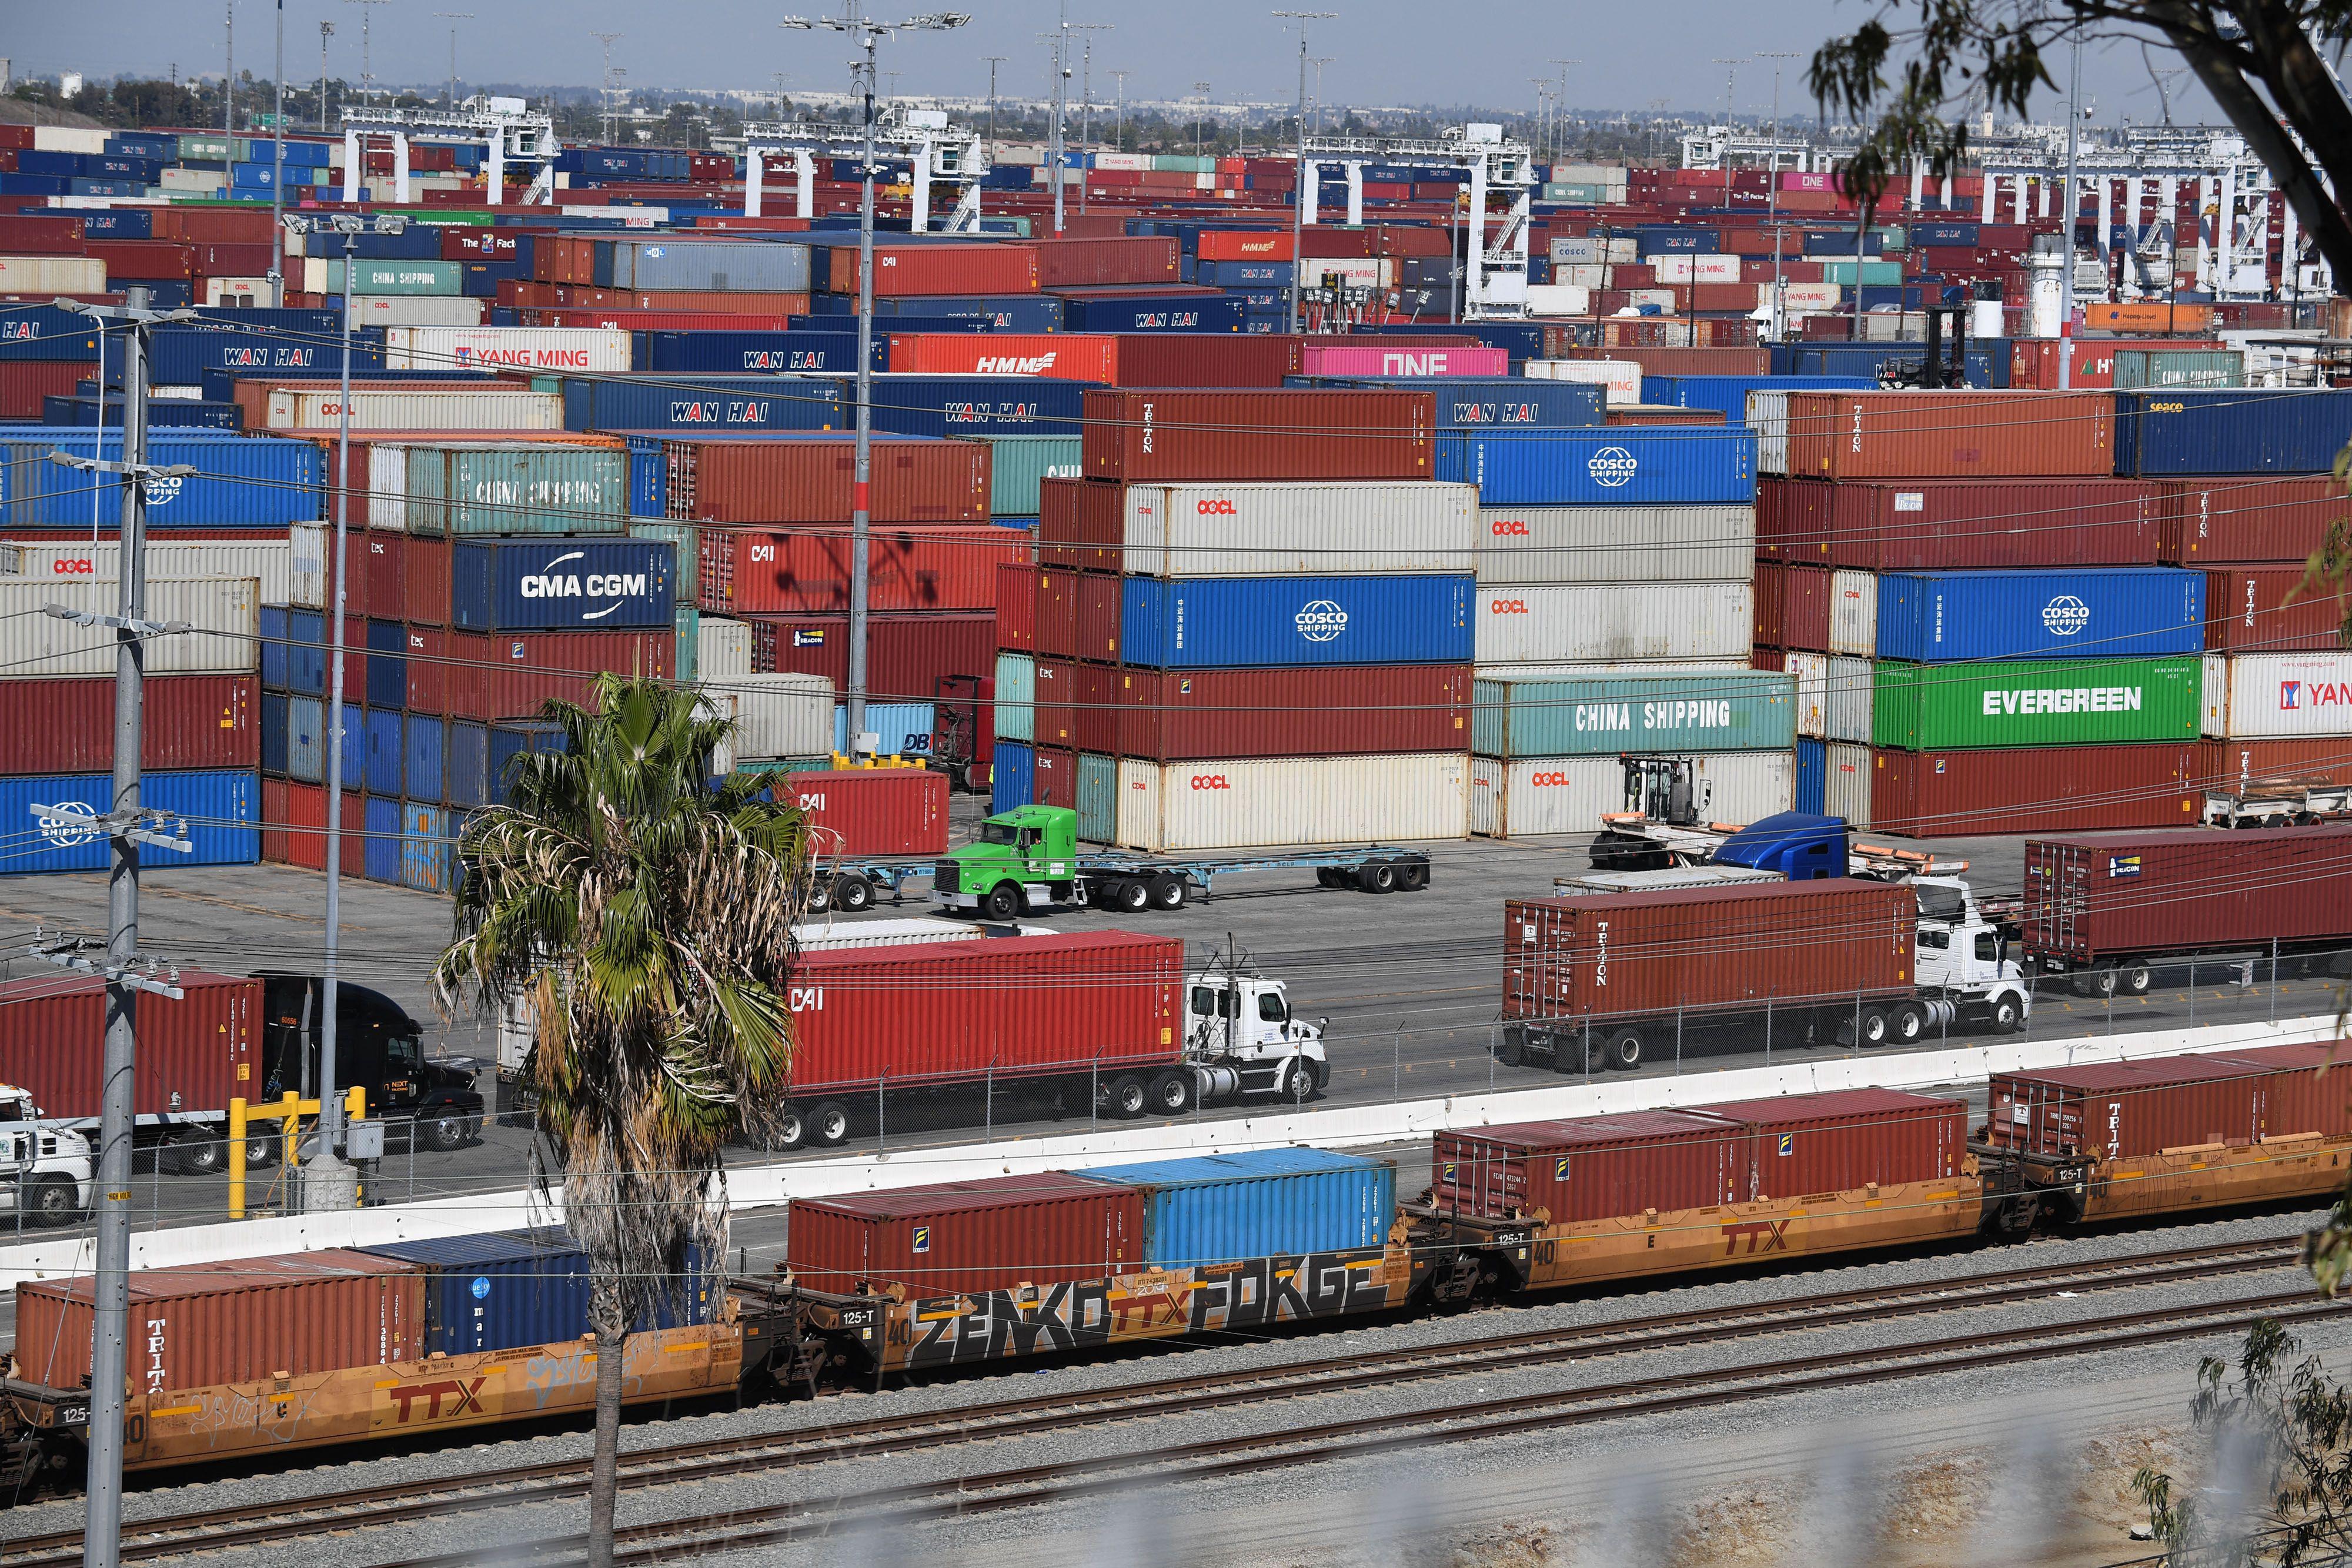 Shipping containers pile up, including on trucks waiting in a line and on a train.